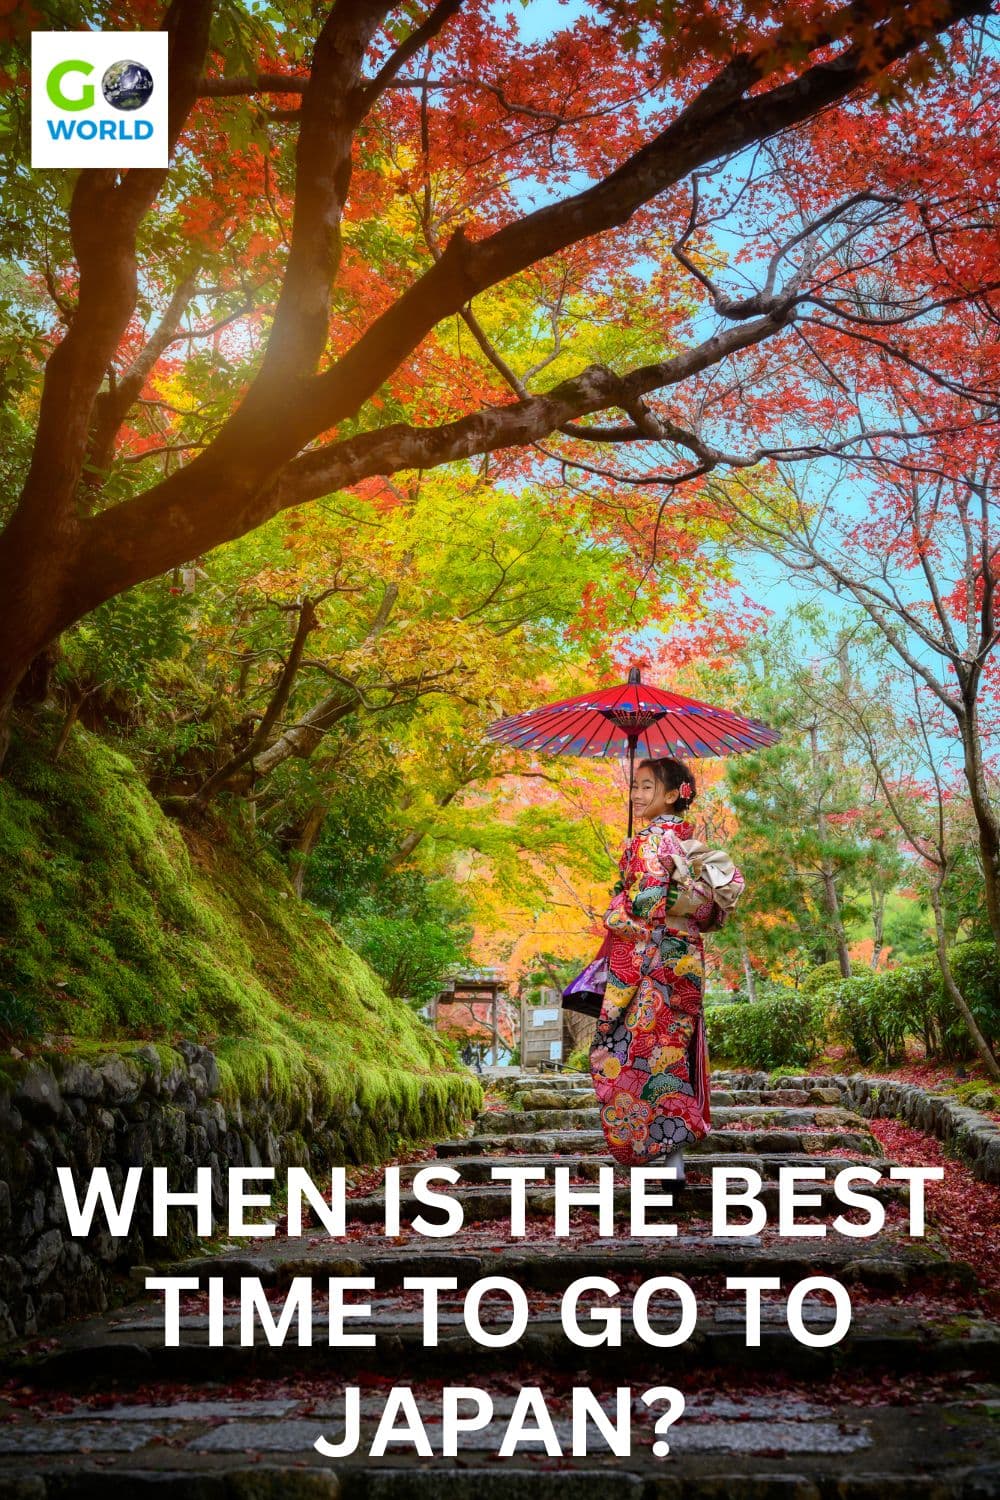 Japan is a popular year-round destination, but when is the best time to visit Japan? Here is a month-by-month breakdown of what to expect. #Japan #besttimetovisitjapan